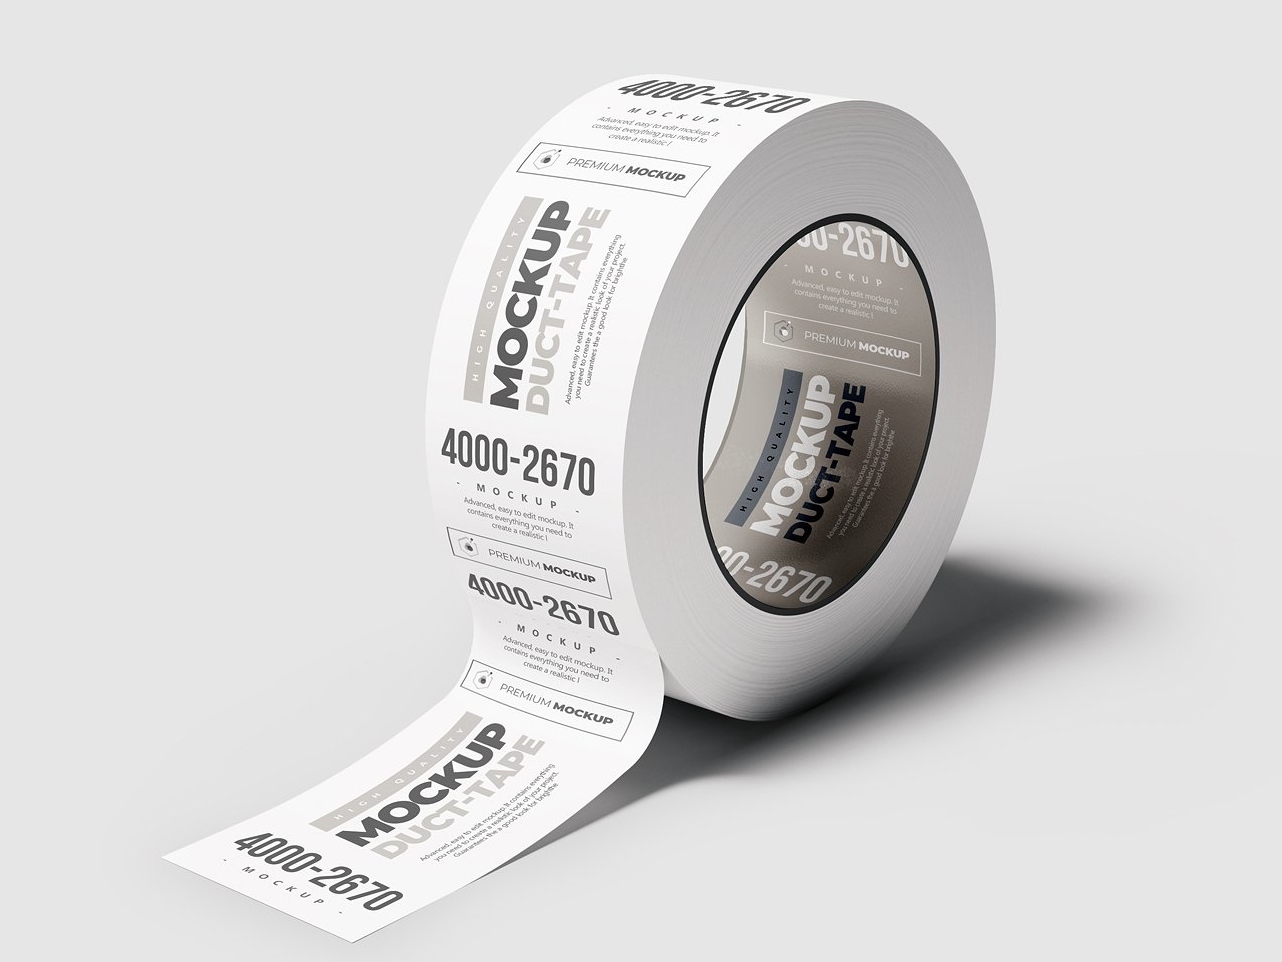 Download Duct Tape Mock-ups by GraphicBoat on Dribbble